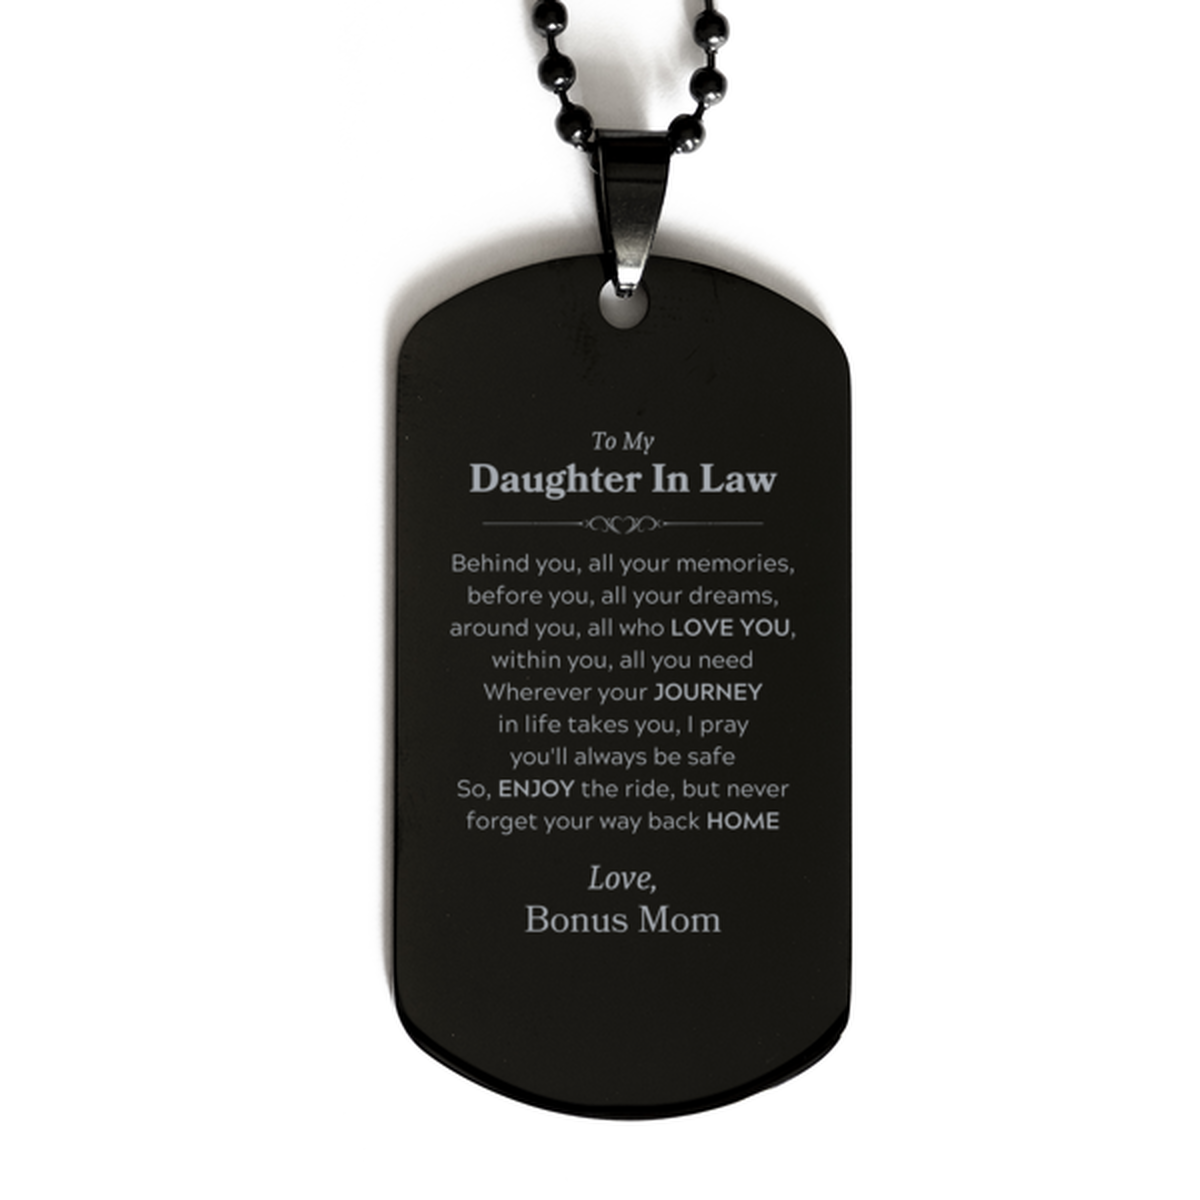 To My Daughter In Law Graduation Gifts from Bonus Mom, Daughter In Law Black Dog Tag Christmas Birthday Gifts for Daughter In Law Behind you, all your memories, before you, all your dreams. Love, Bonus Mom